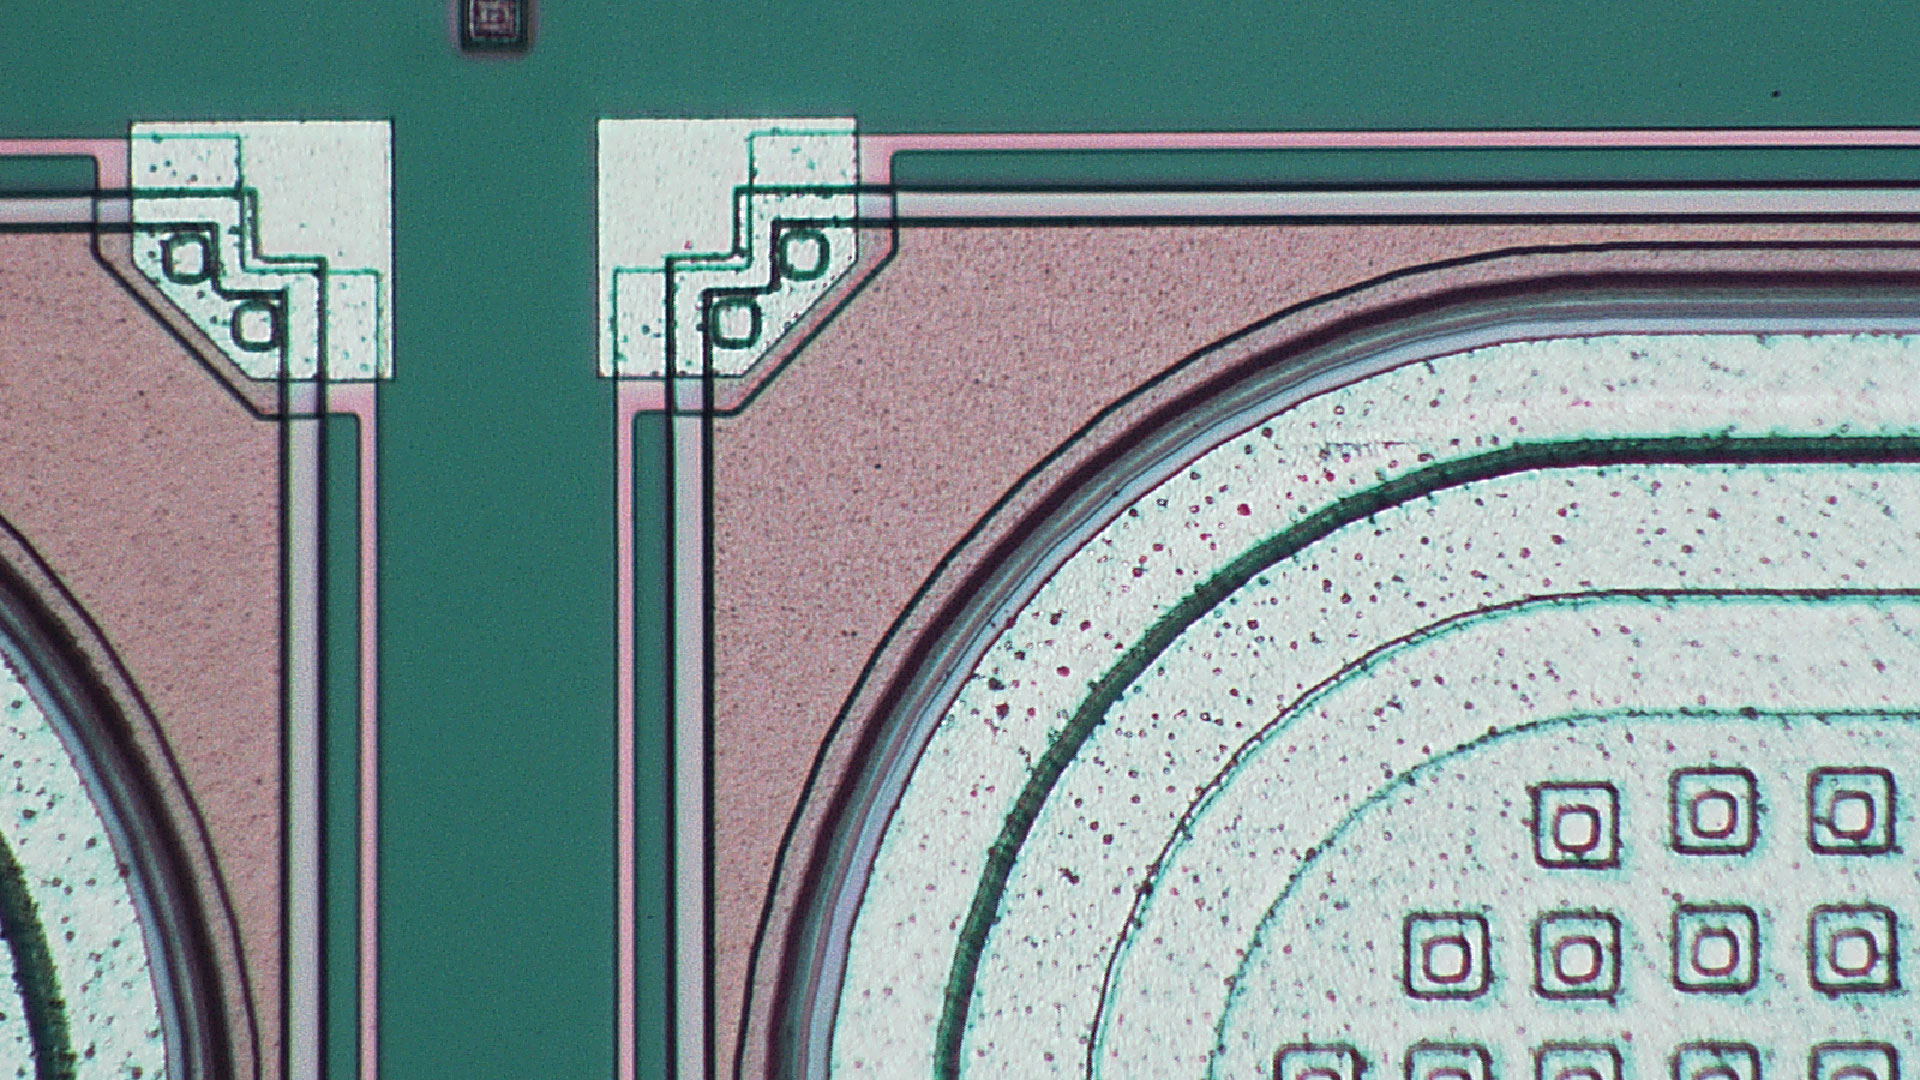 [Translate to japanese:] To better see fine details and defects, a semiconductor material can be inspected using a microscope with various types of lighting. This image was taken with coaxial illumination. 